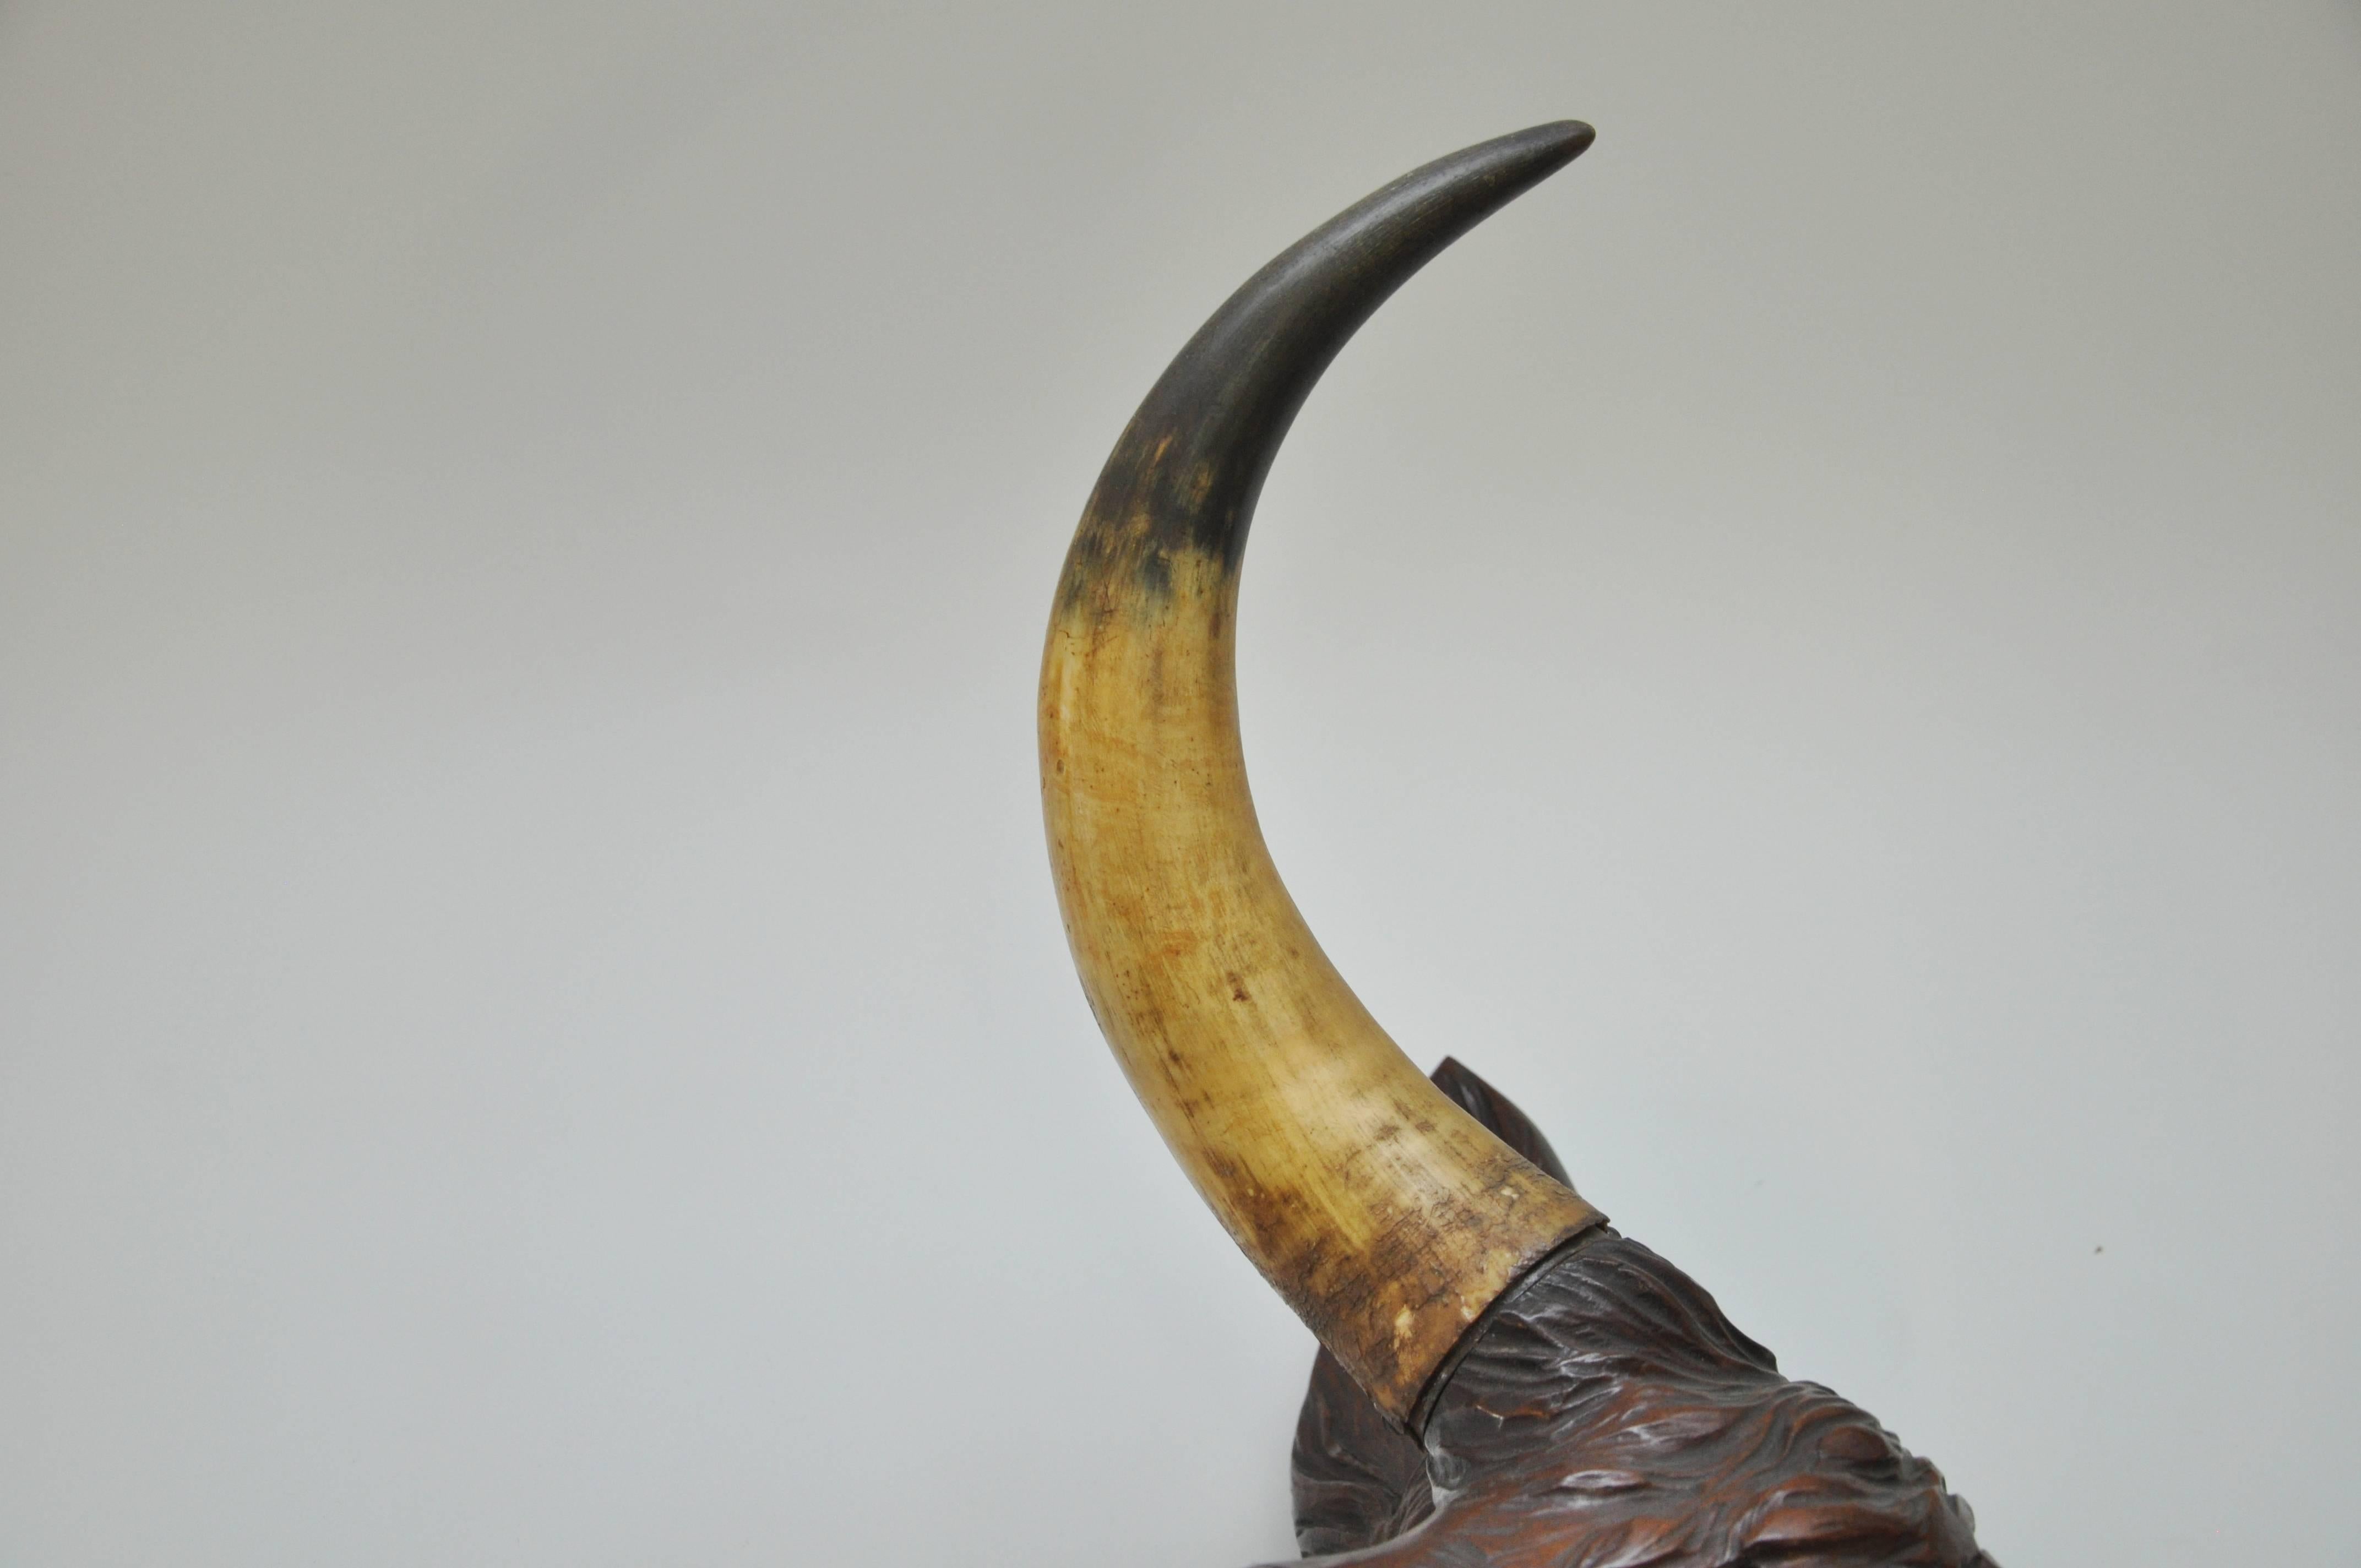 Large carved mahogany bull head. Horns are real horns from a bull. Possibly hung in a butcher shop.